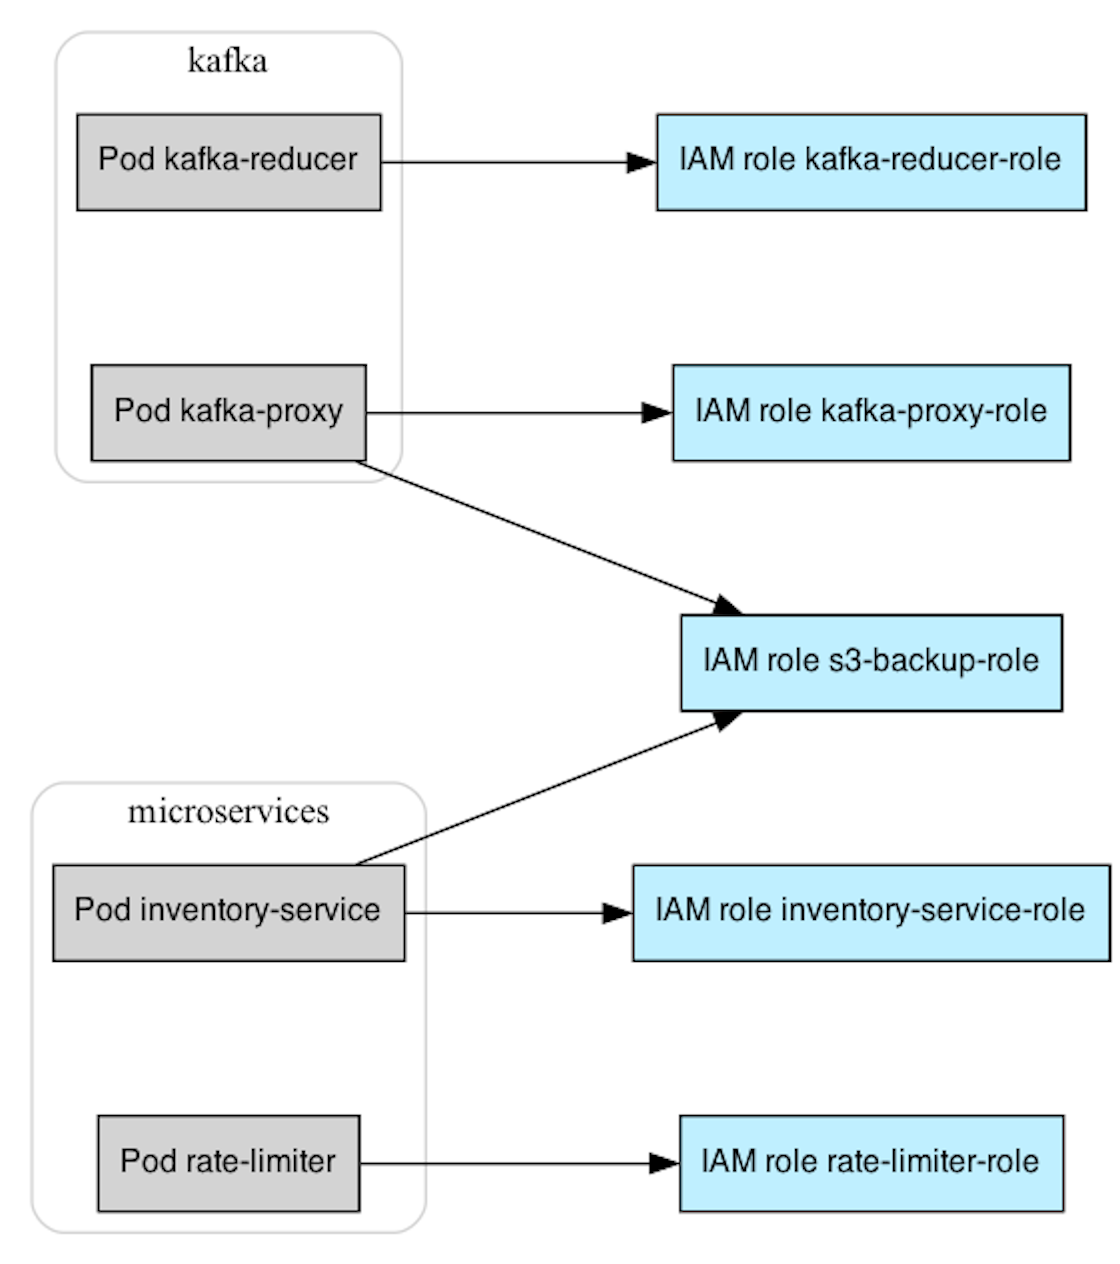 MKAT is able to graph Kubernetes workloads that can assume IAM roles in your AWS account.